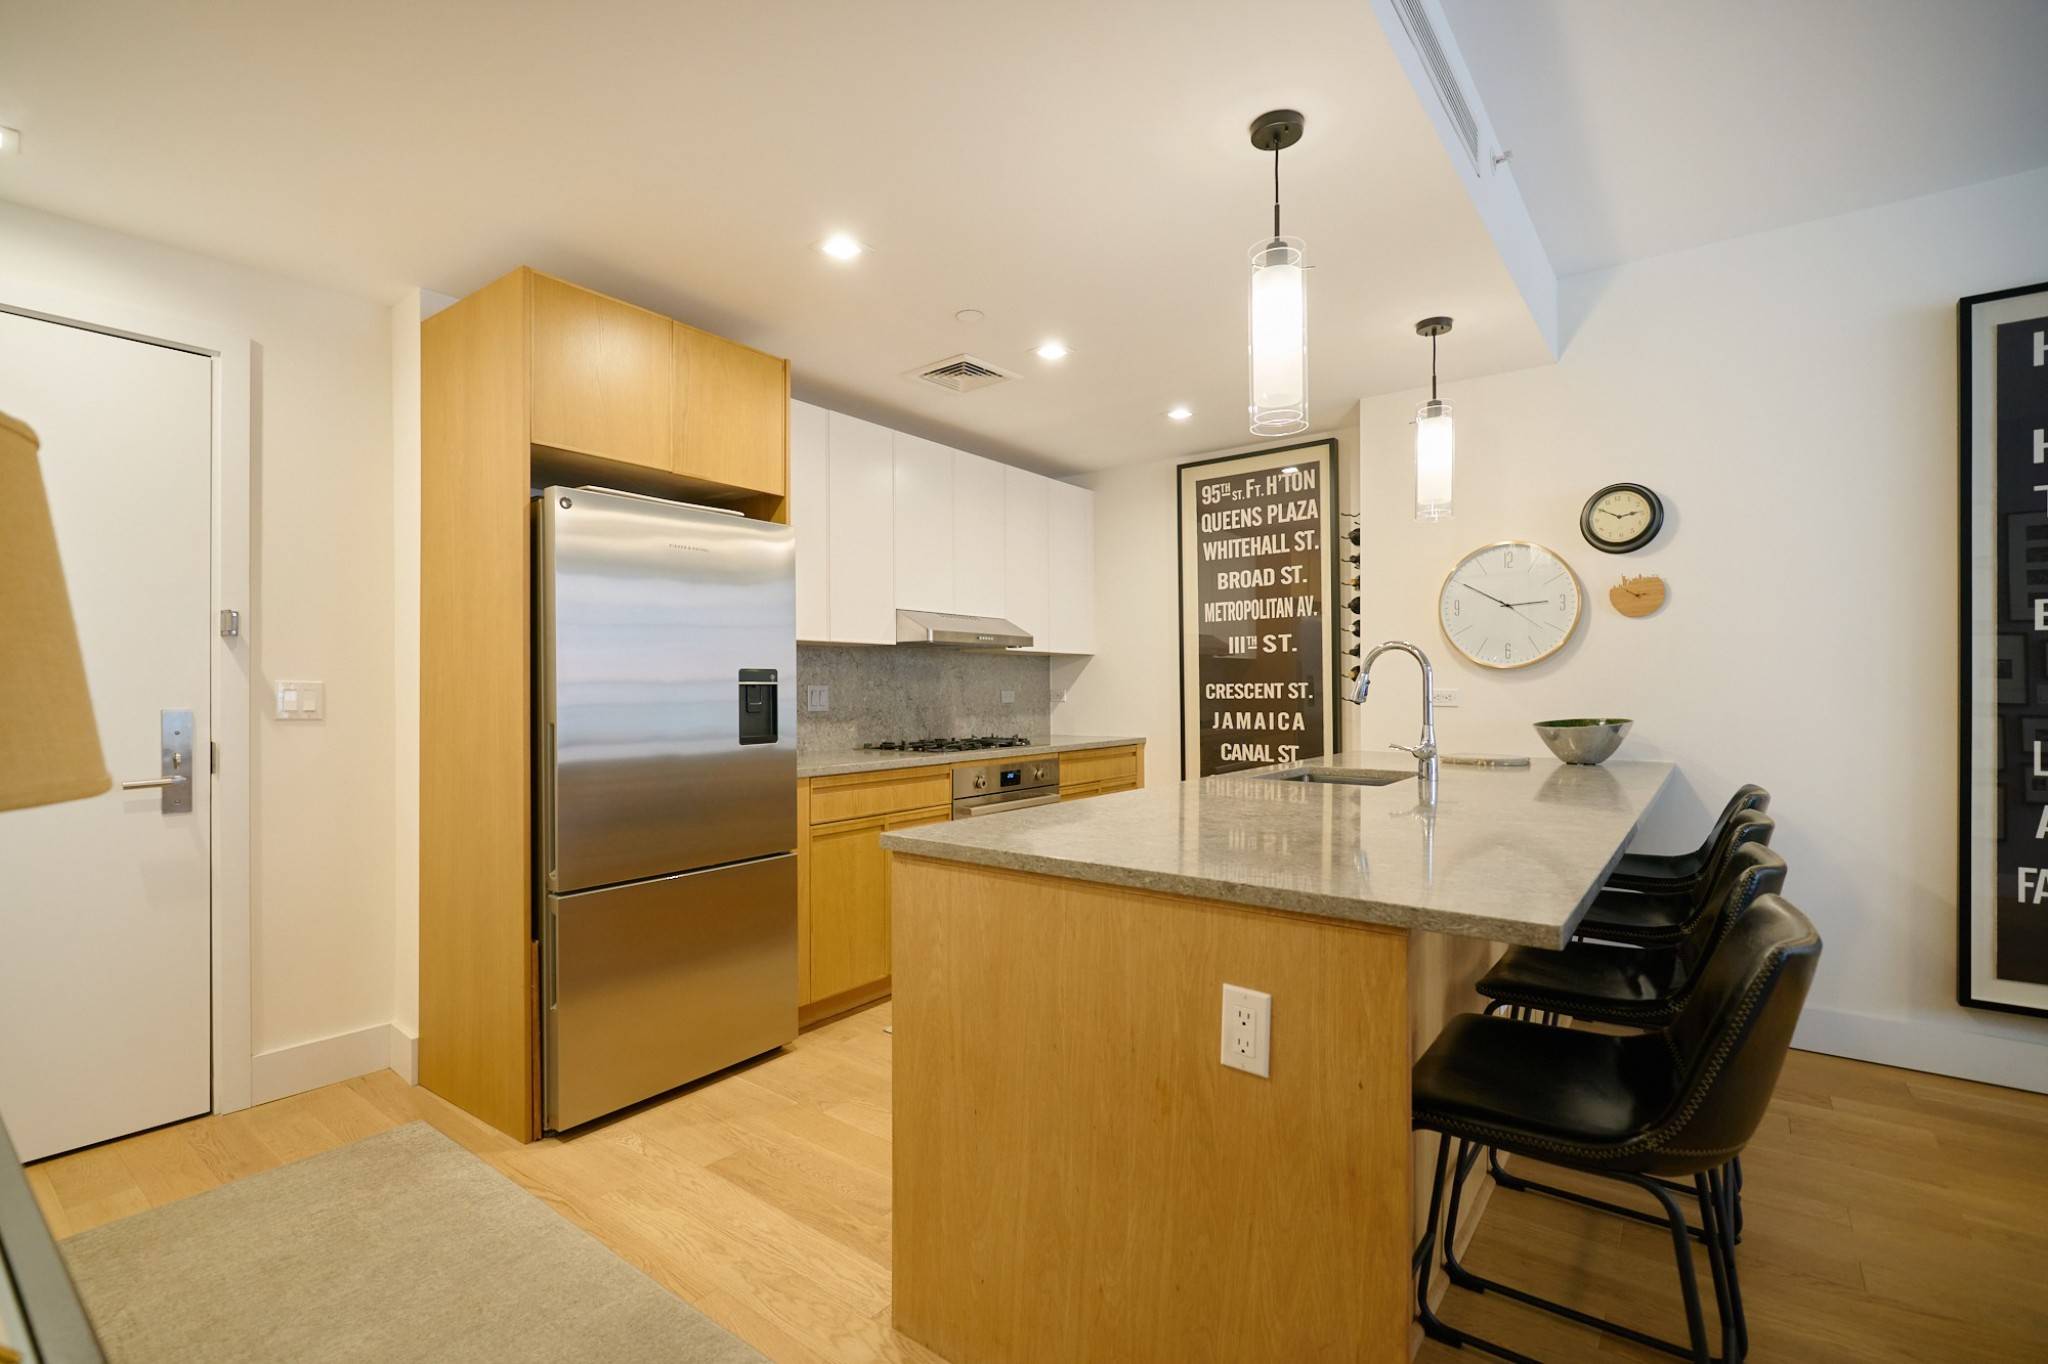 FEATURES Open Kitchen with Gray Caesarstone Countertops amp ; Island Premium Appliances by Bertazzonni, Fisher Paykel, amp ; Bosch Secondary Bedroom features Custom Wall Sofa Bed by Resource Furniture Blackout ...